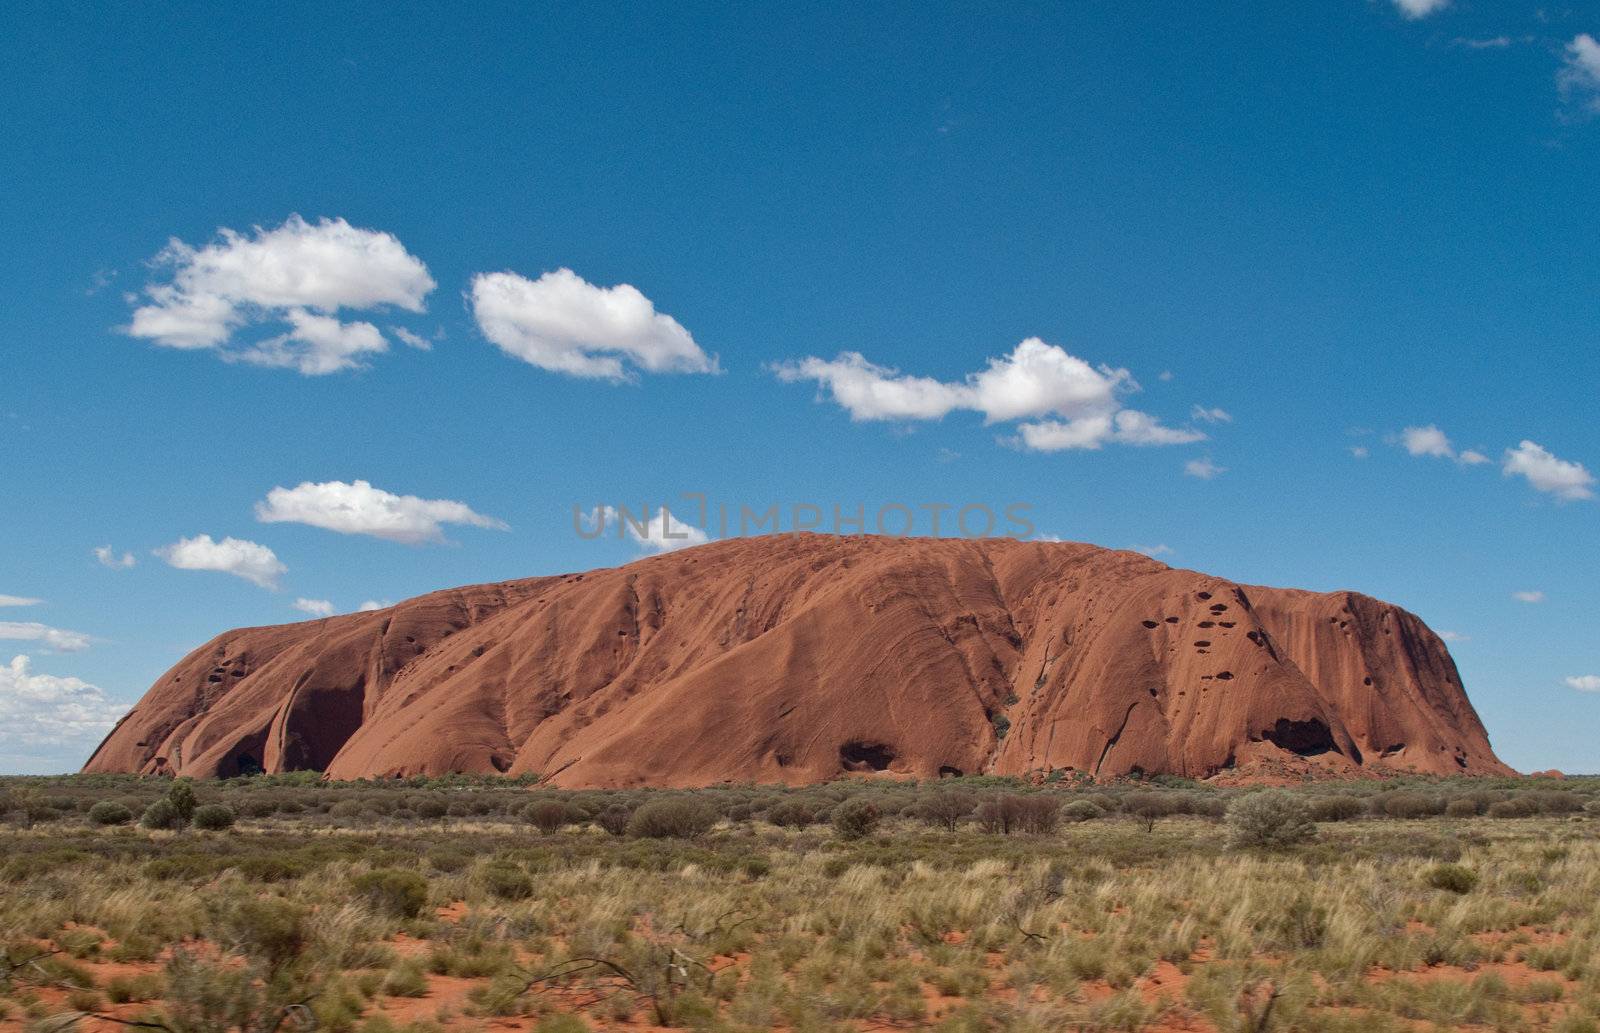 Ayers Rock by steheap